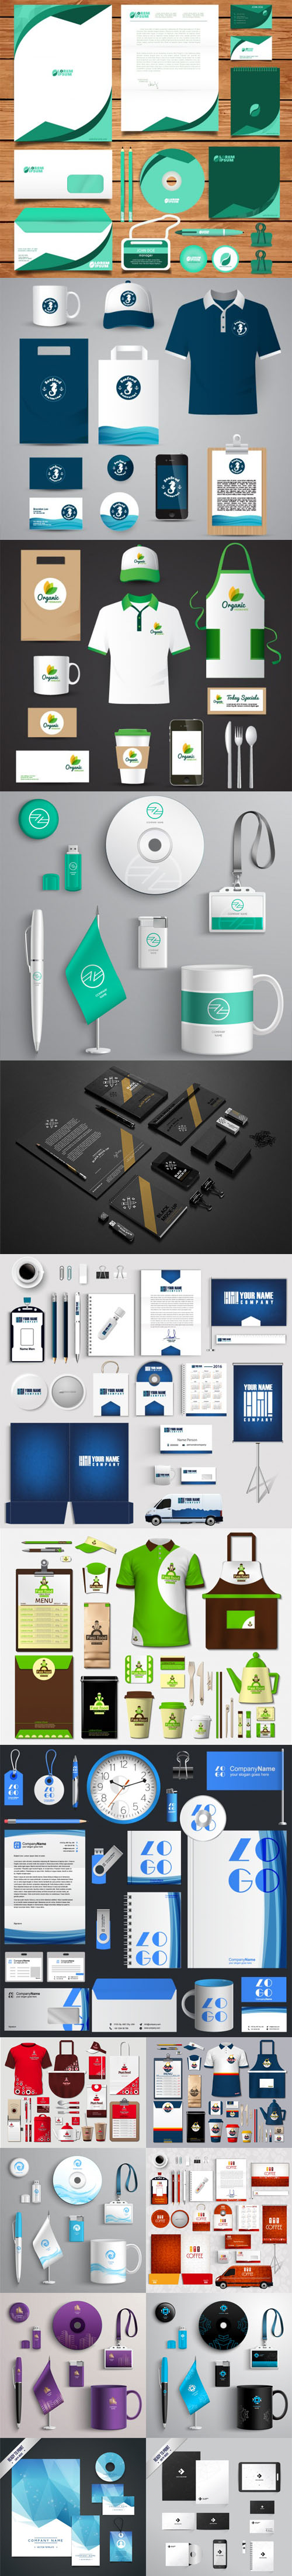 16 Corporate Identity & Stationery Collection in Vector